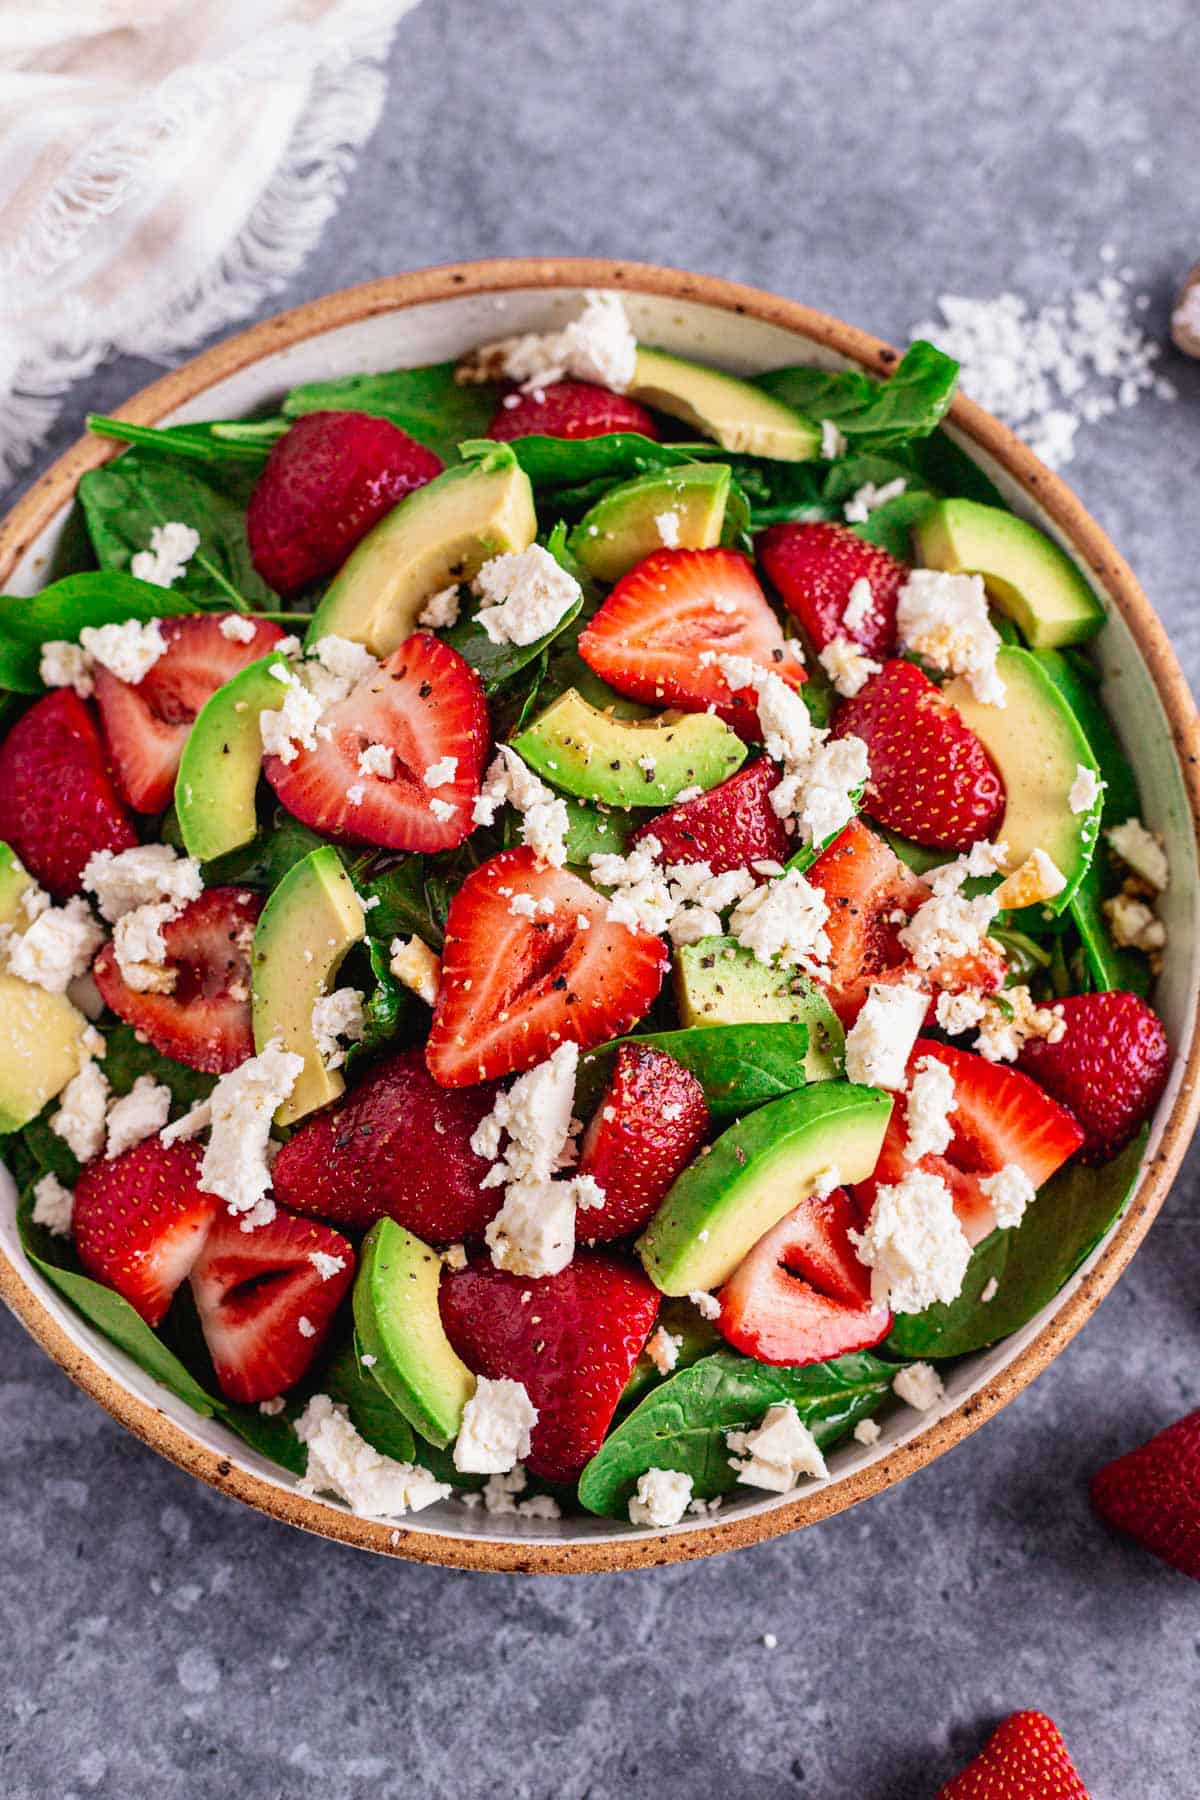 Spinach Strawberry Salad With Feta in a bowl